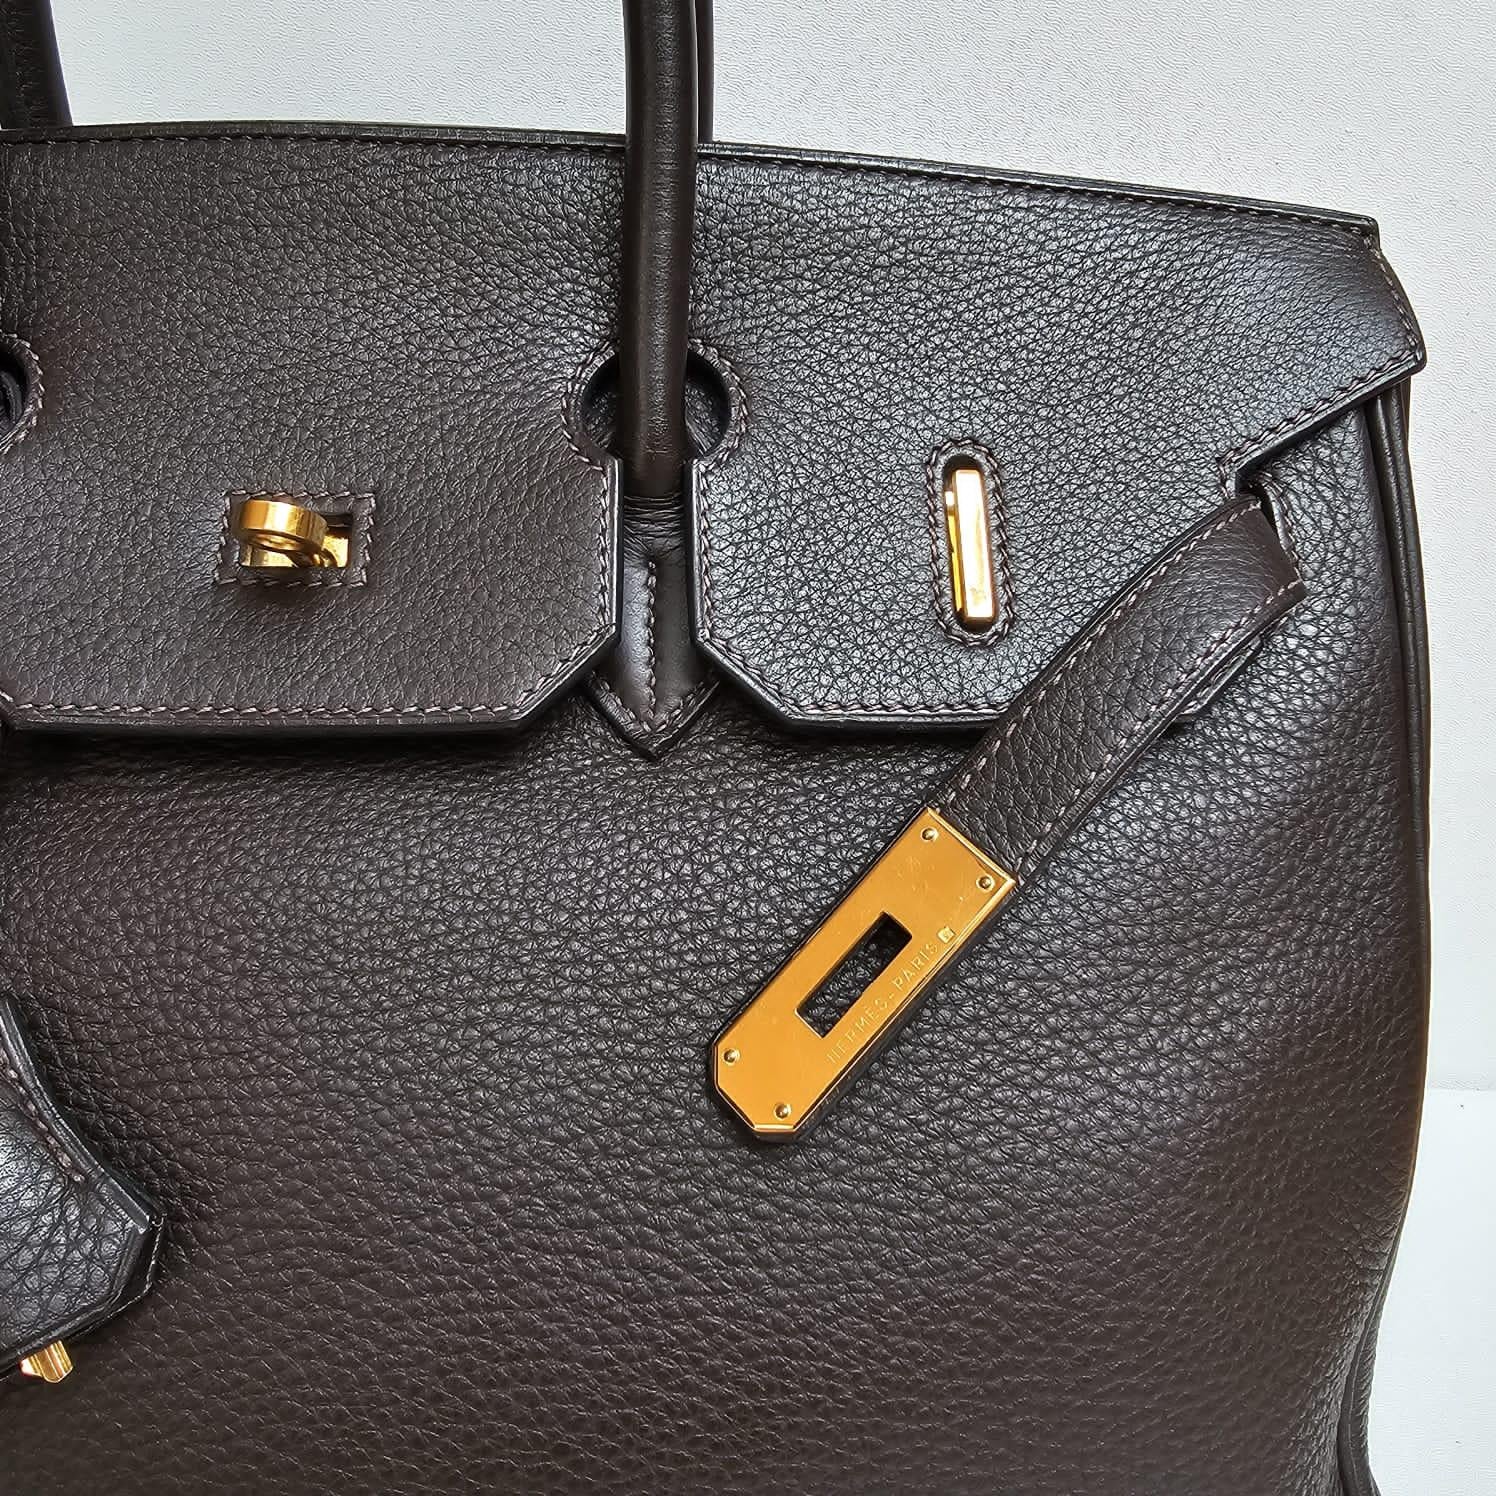 Beautiful birkin 35 in cacao color with gold hardware. Excellent vintage condition. Very minor rubbing on the corners. Comes with dust bag and its tools. Stamp square F from 2002. 